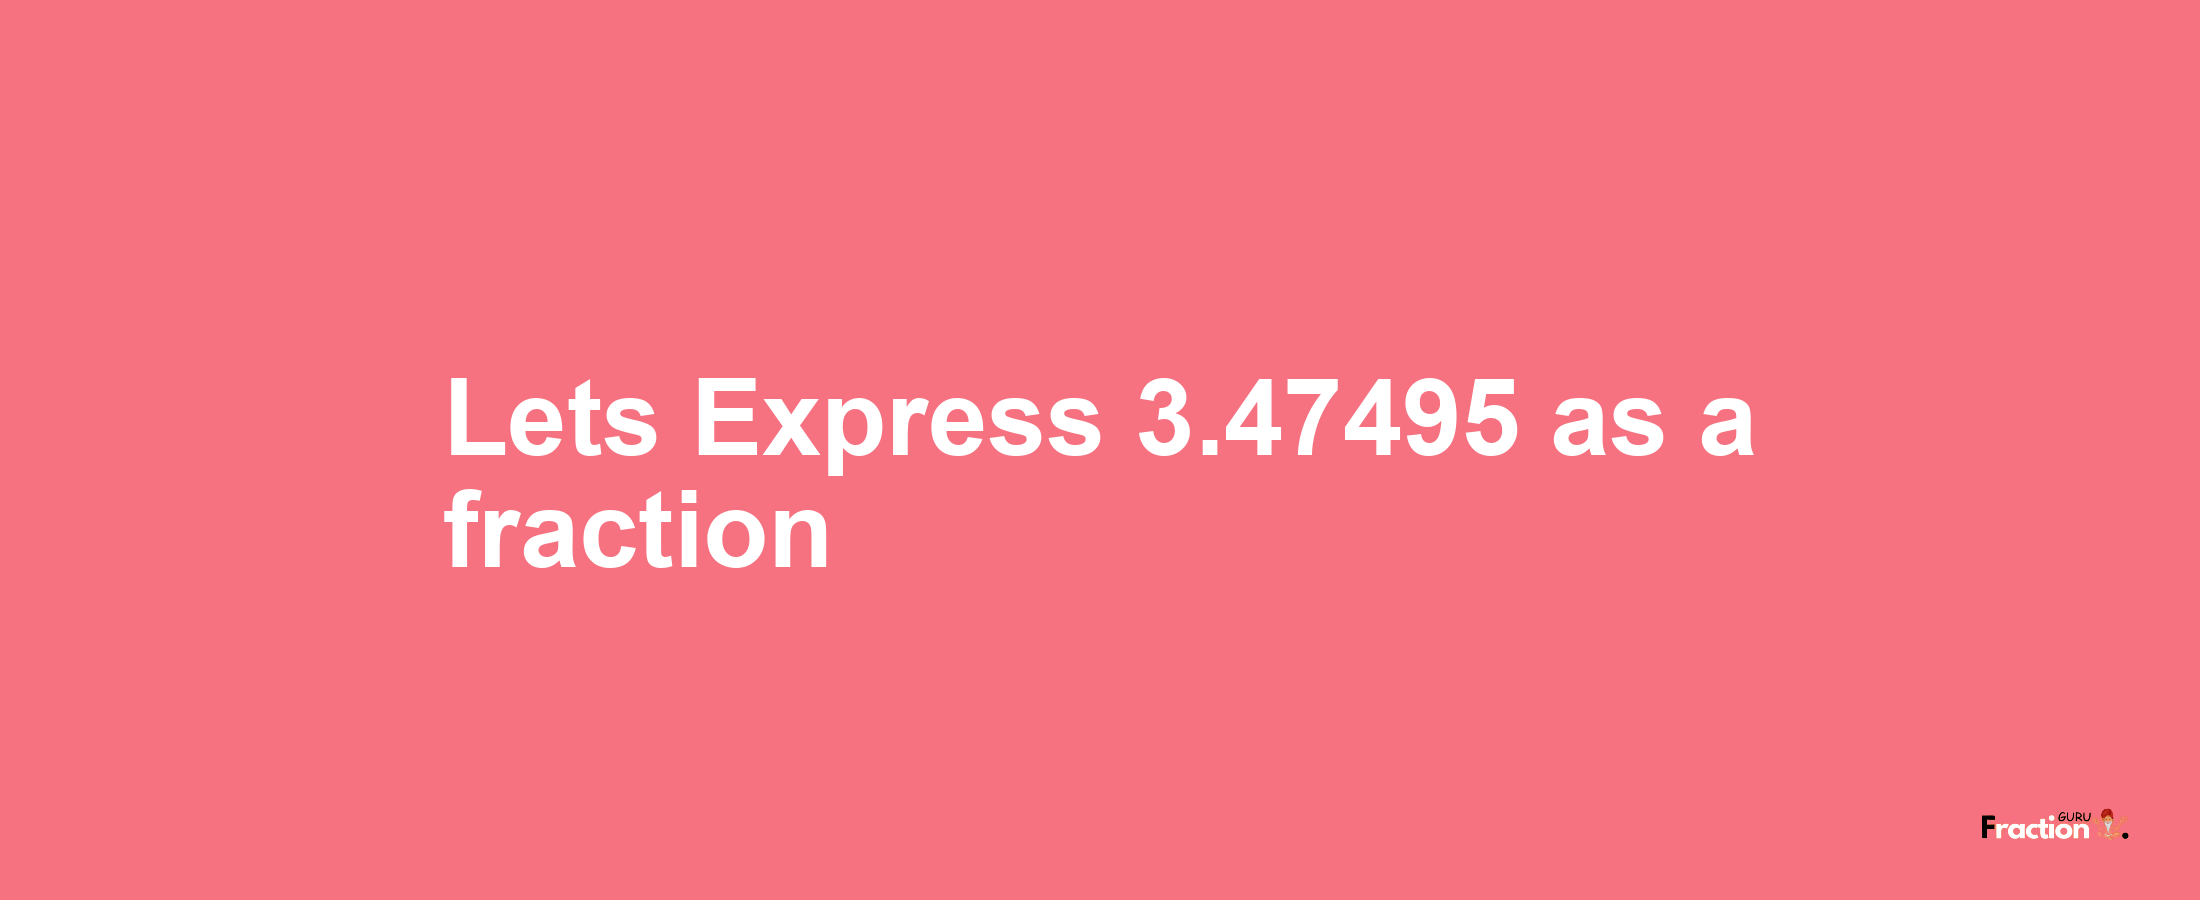 Lets Express 3.47495 as afraction